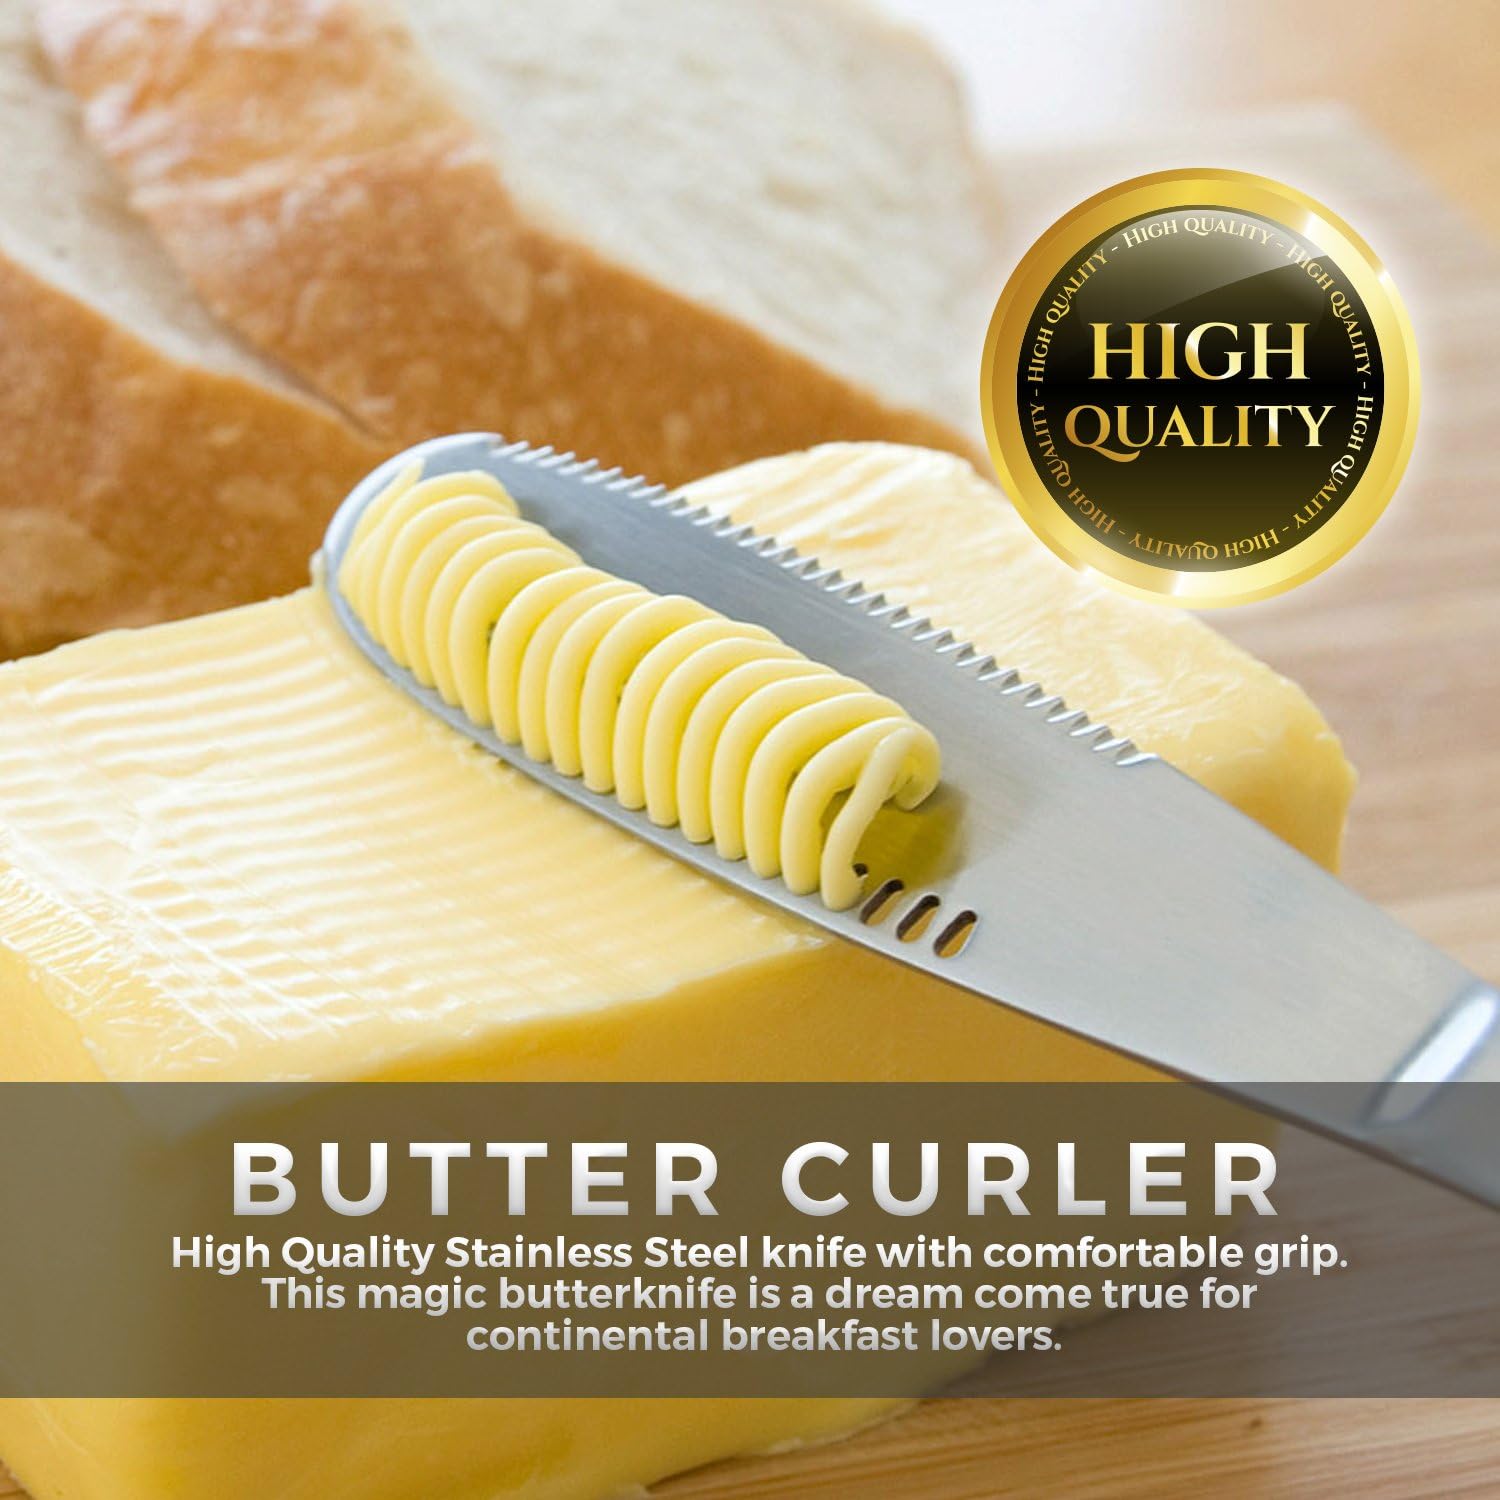 Spread butter and jams like a pro with this stainless steel spreader k –